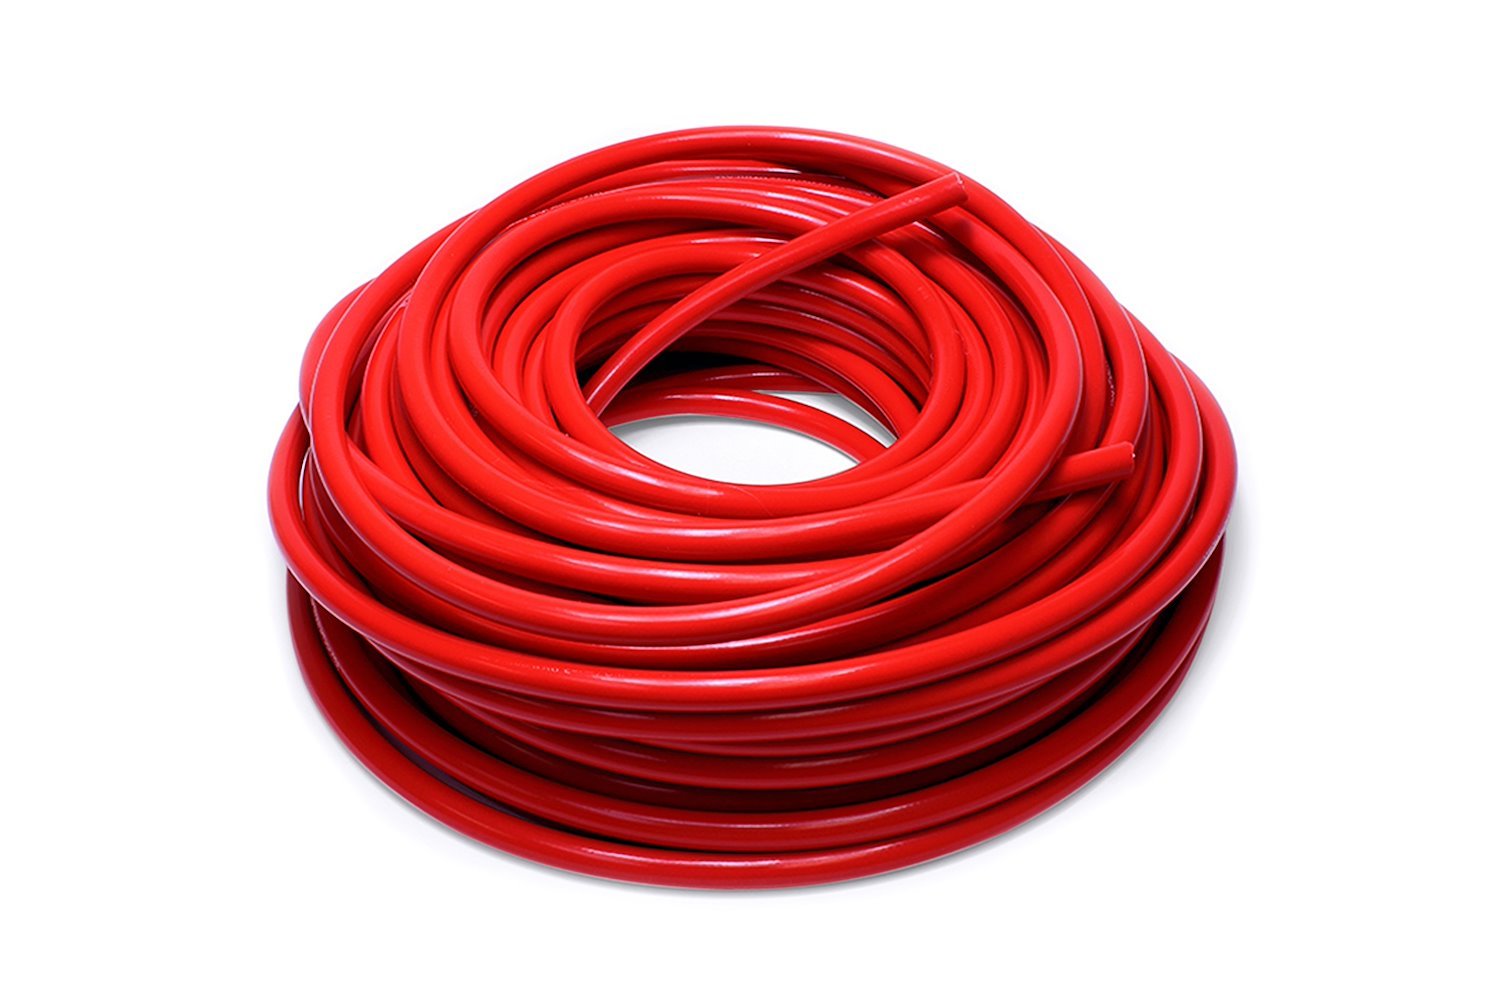 HTHH-087-REDx50 Silicone Heater Hose Tubing, High-Temp 1-Ply Reinforced, 7/8 in. ID, 50 ft. Roll, Red